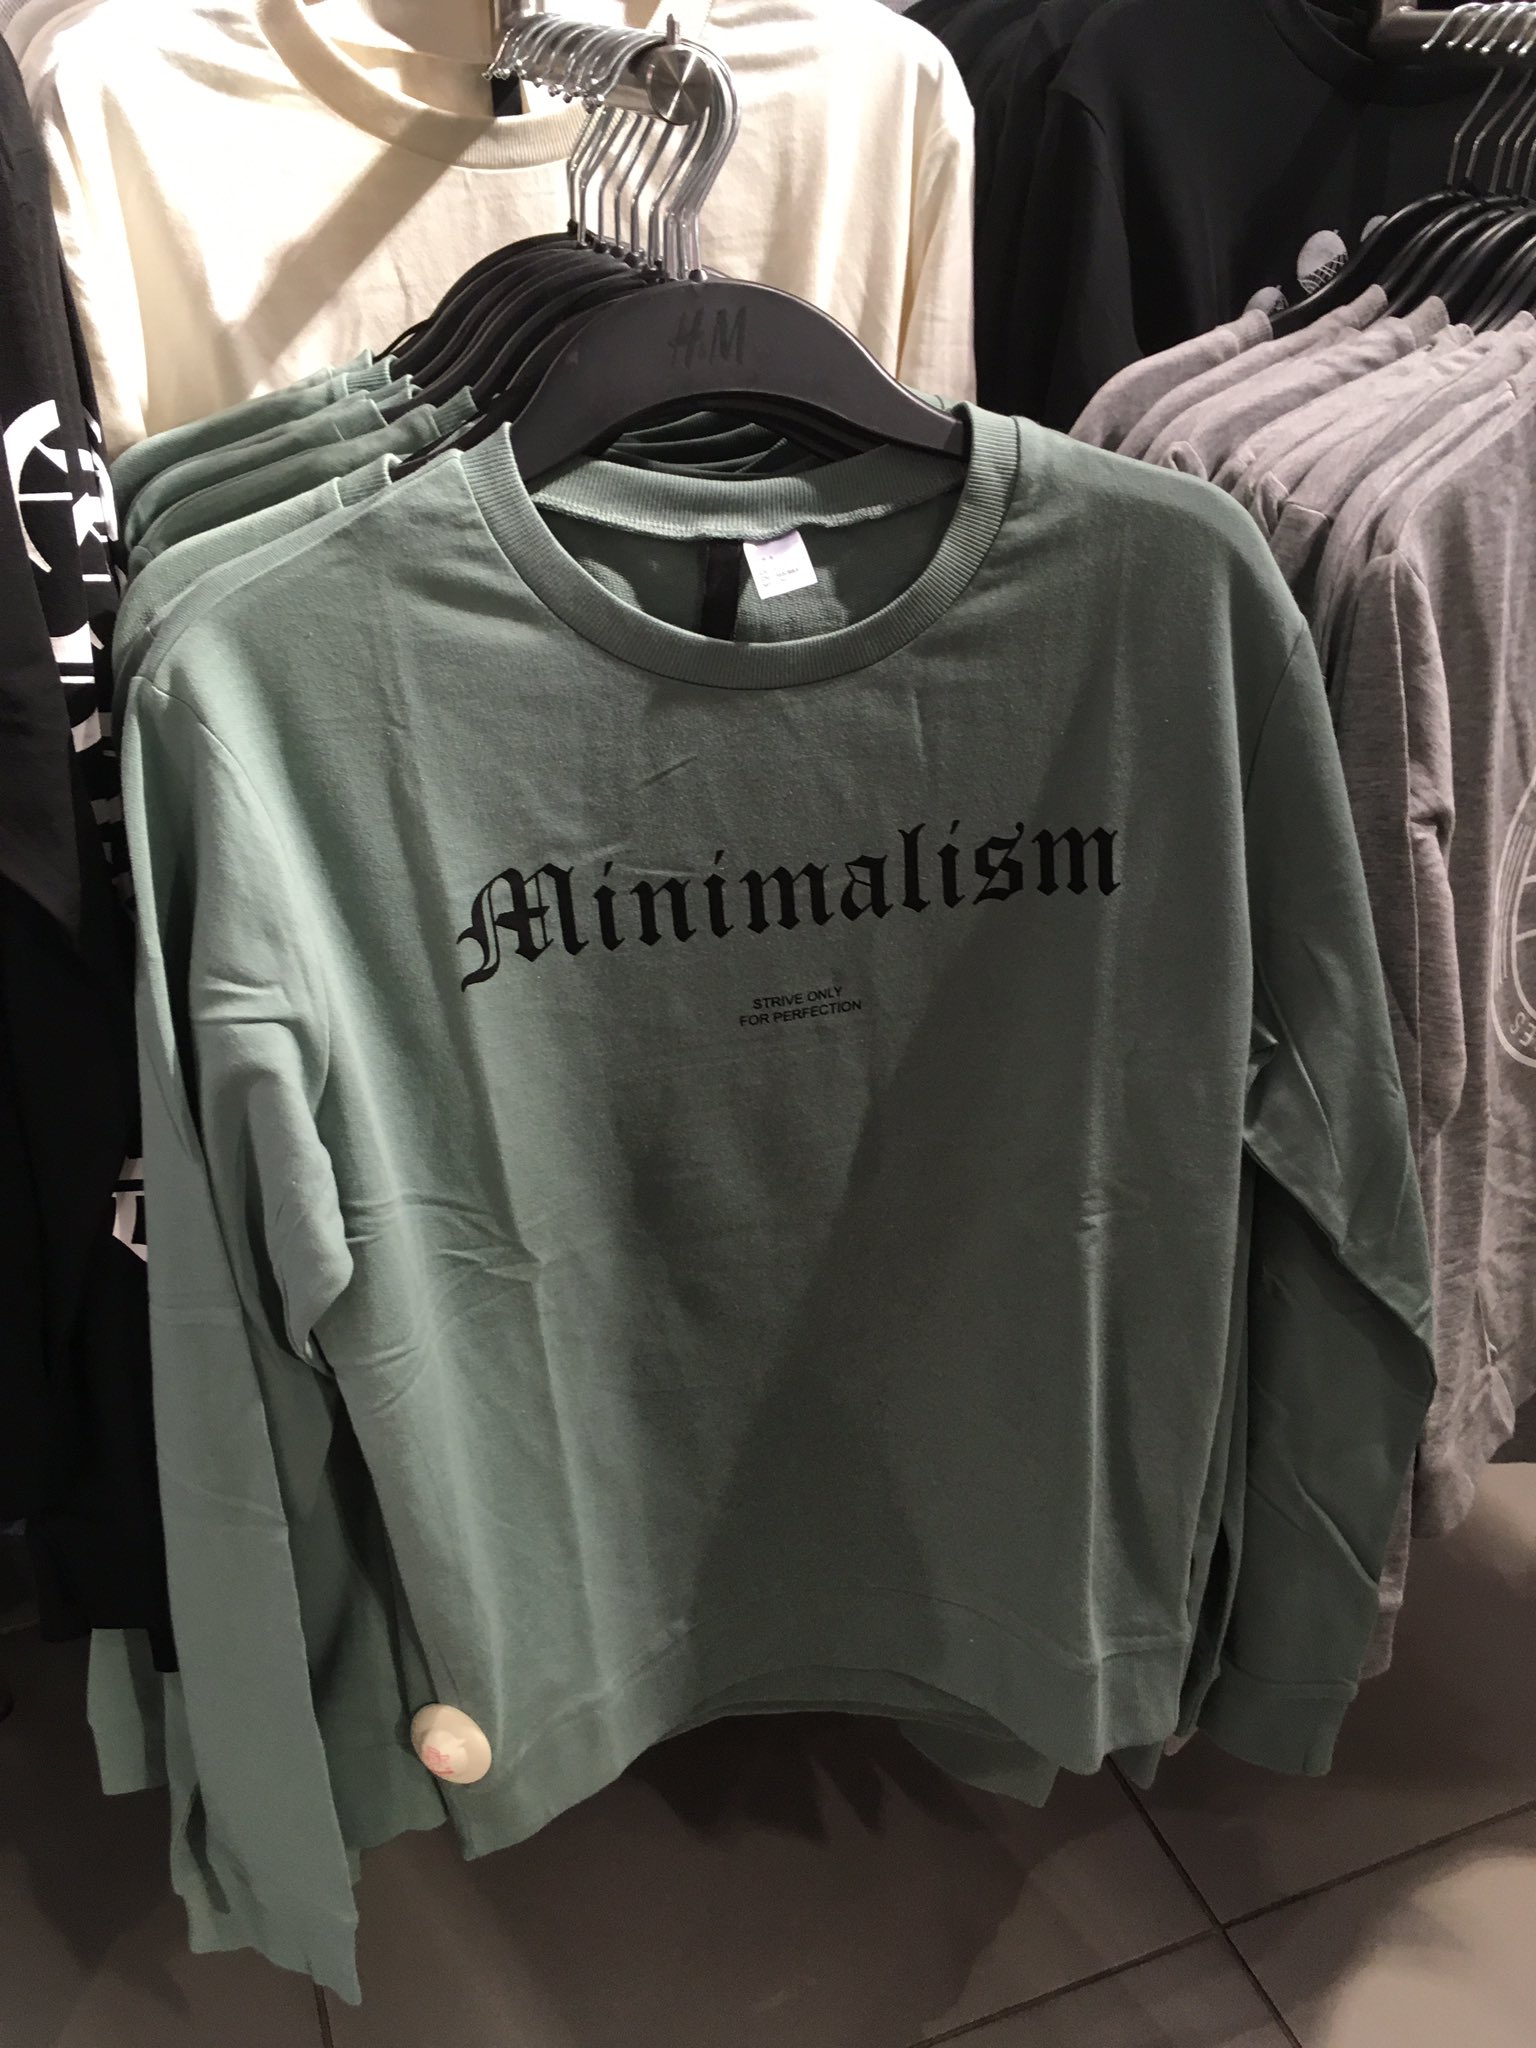 Charli on Twitter: "In H&M planning meeting: "What's trendy these days?" "Minimalism I guess" "Let's run with Oh the of this fast fashion! https://t.co/mJKpjYPkpG" / Twitter